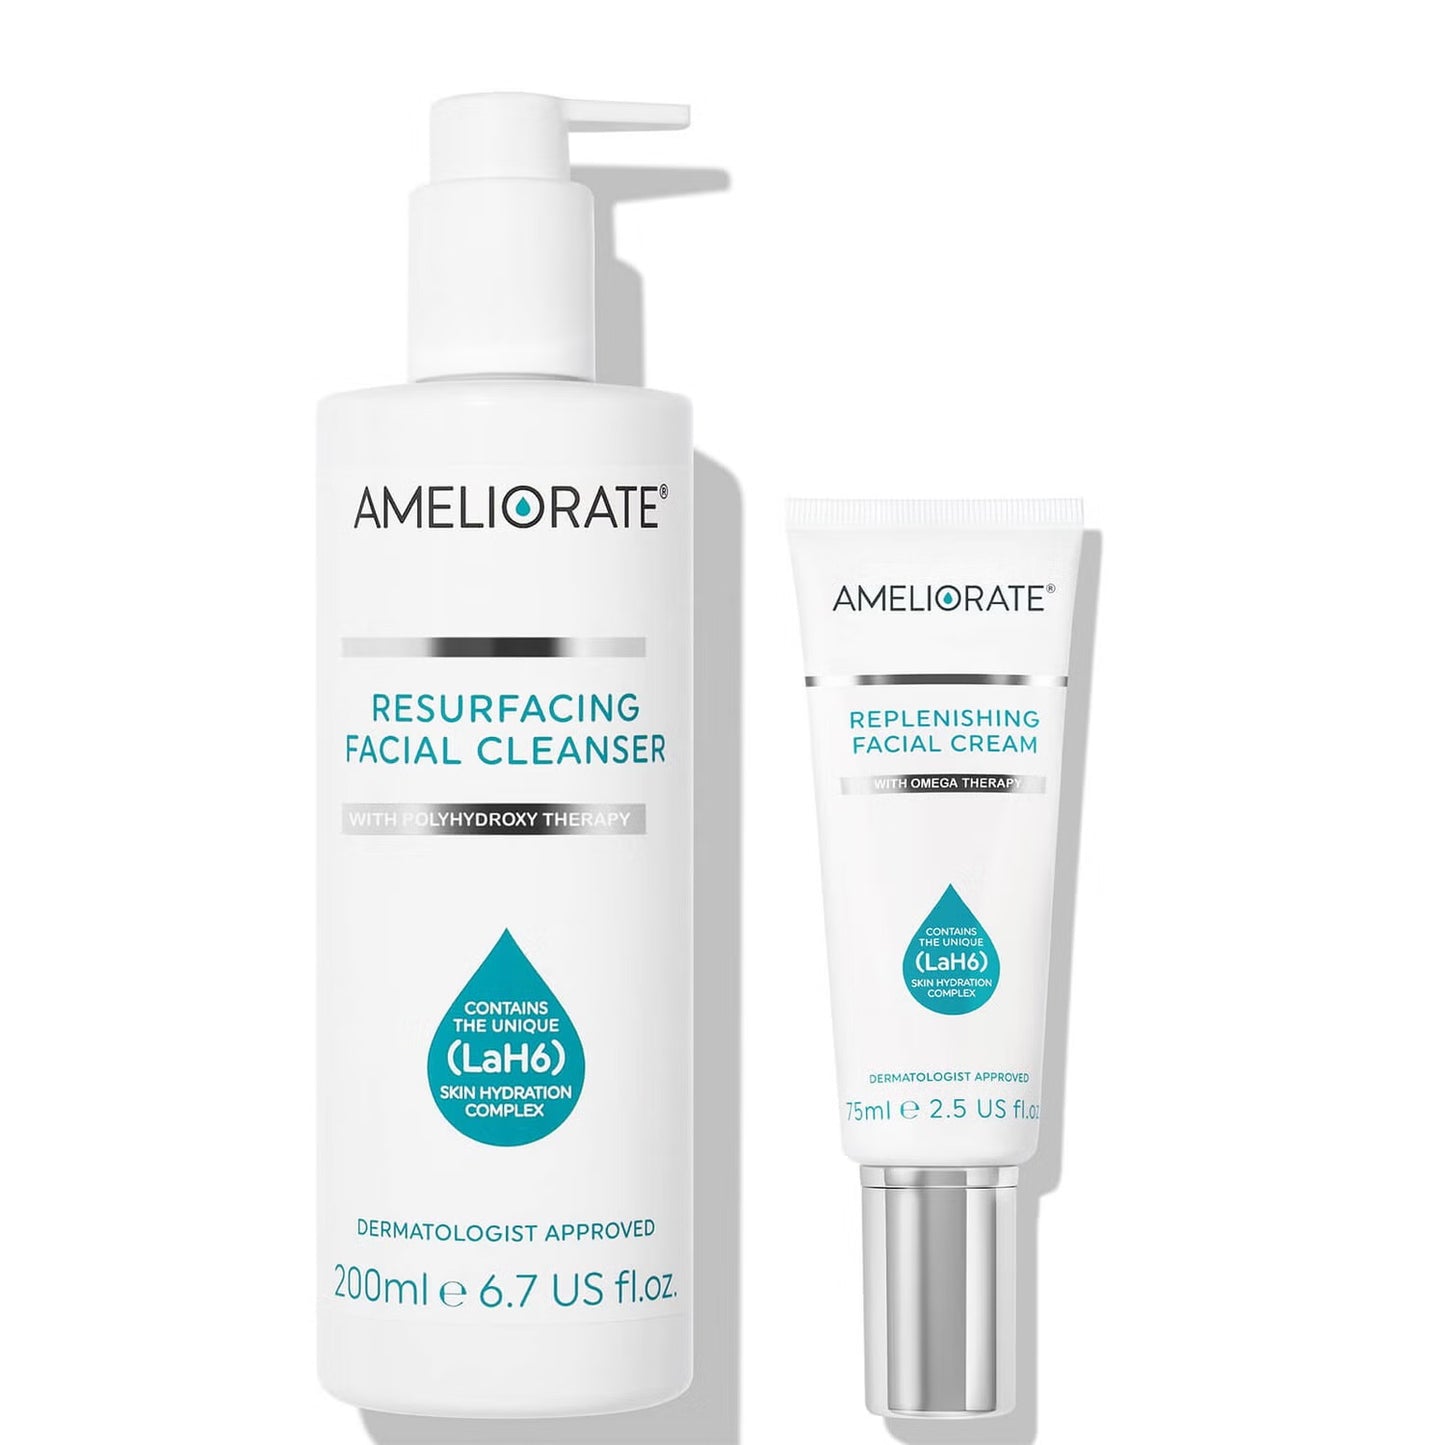 AMELIORATE - Facial Cleansing Kit